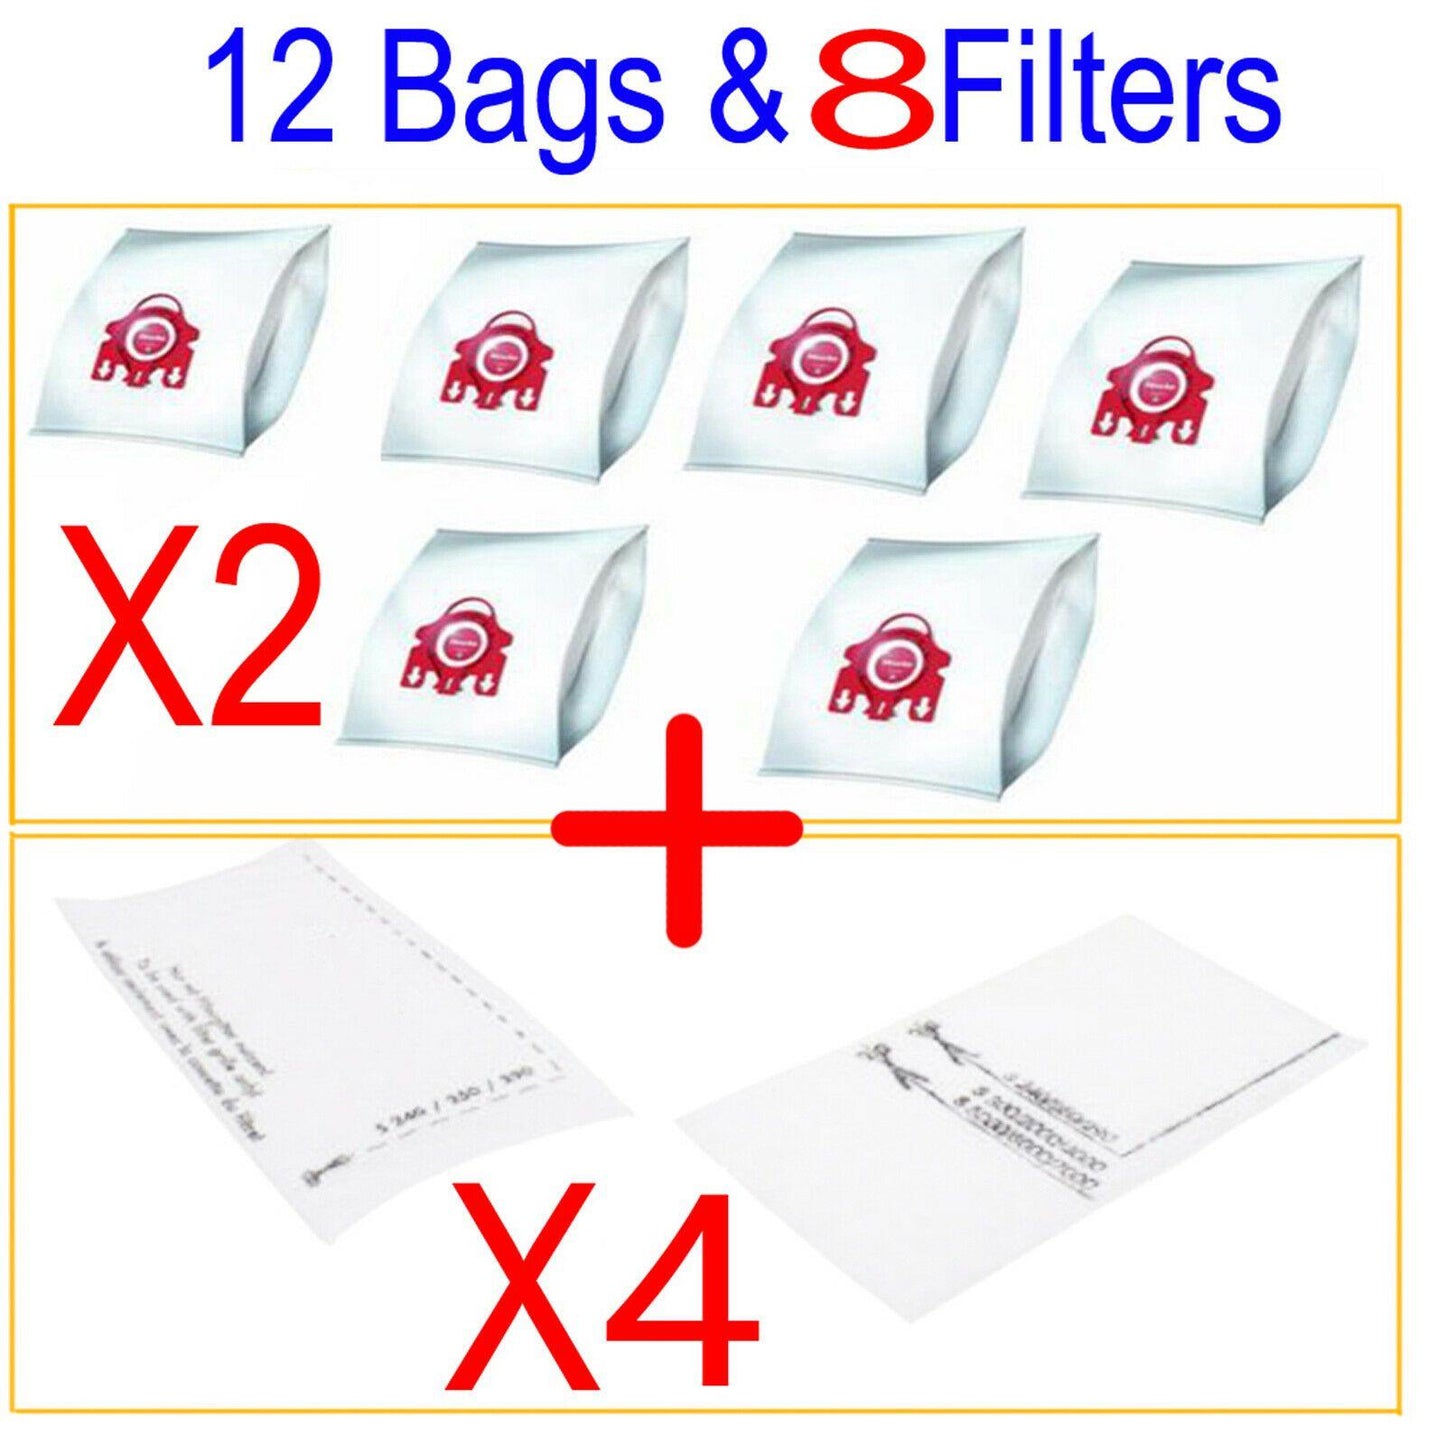 12 Synthetic Bags & 8 Filters For Miele S700 S500 S300 S200 Series 09917710 Sparesbarn